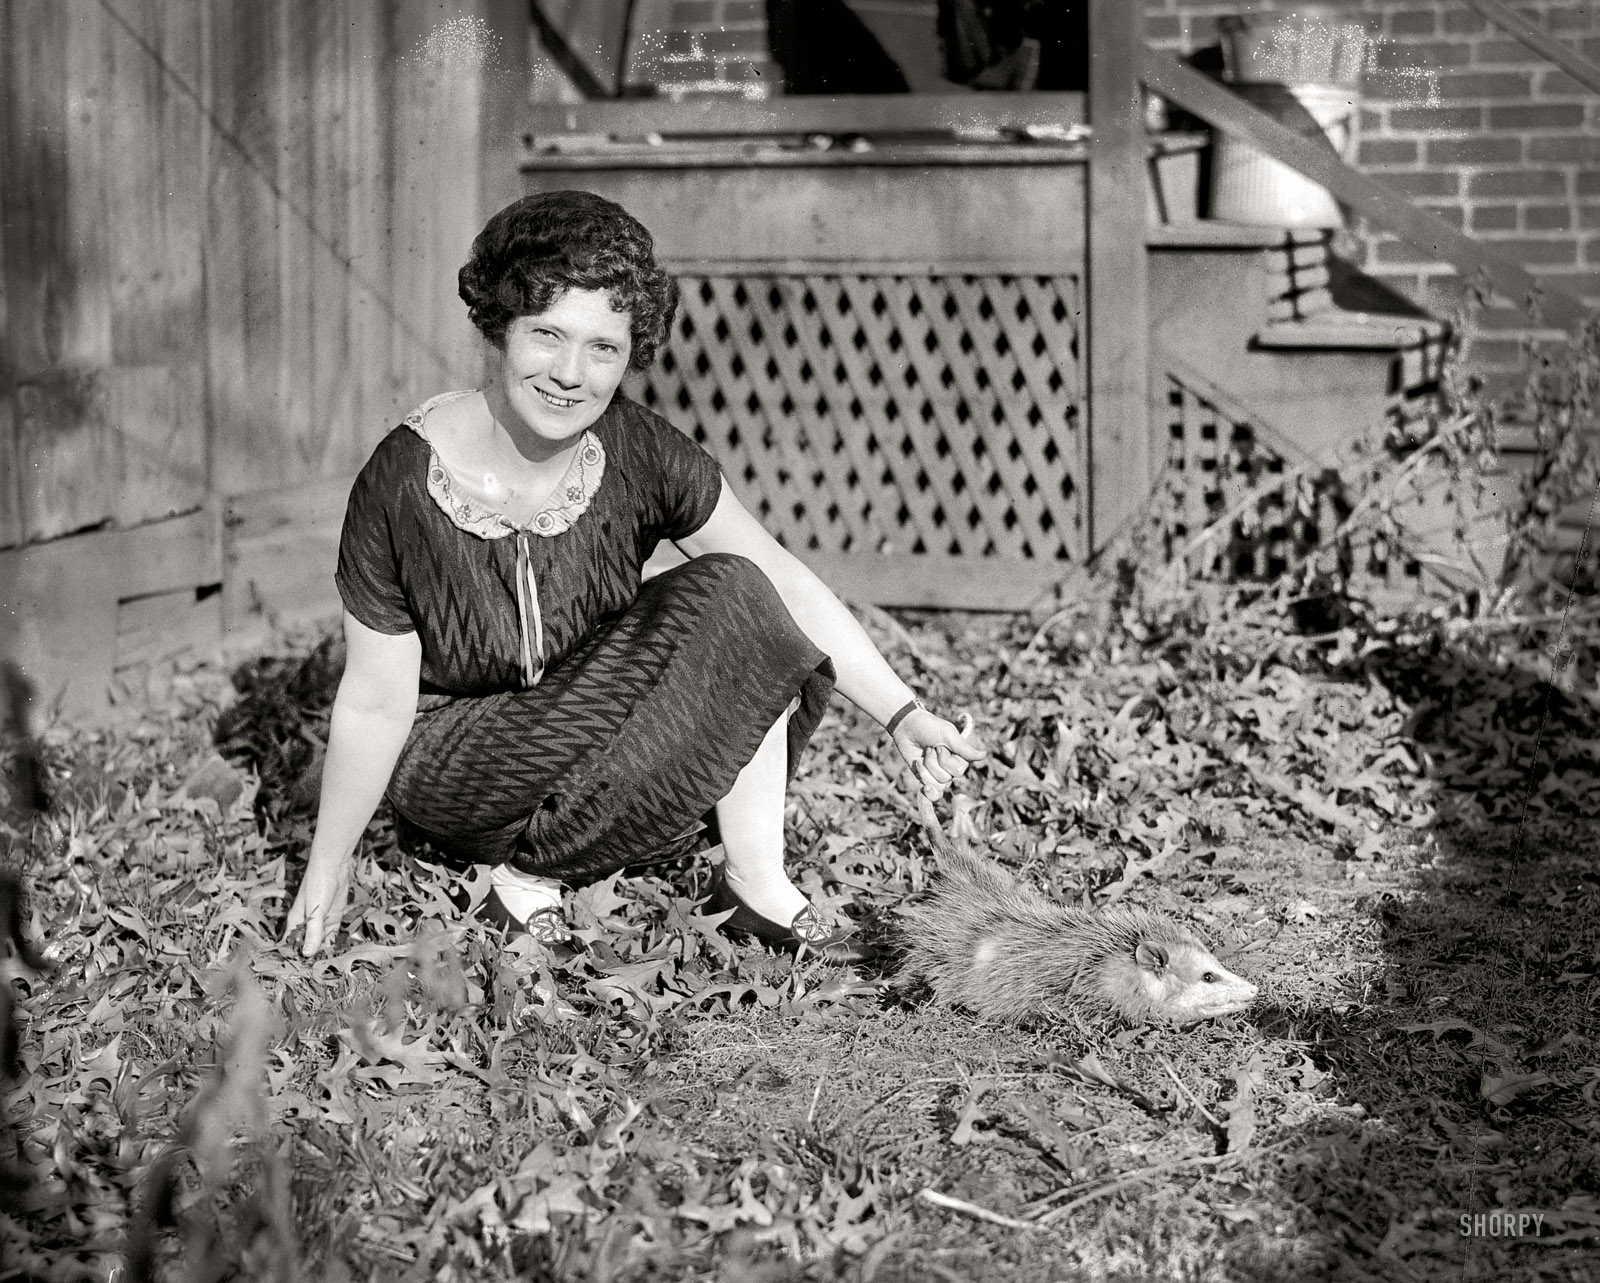 December 12, 1925. "Mrs. May B. Hendley." I'll bet there's an interesting story here. National Photo Company Collection glass negative. View full size.